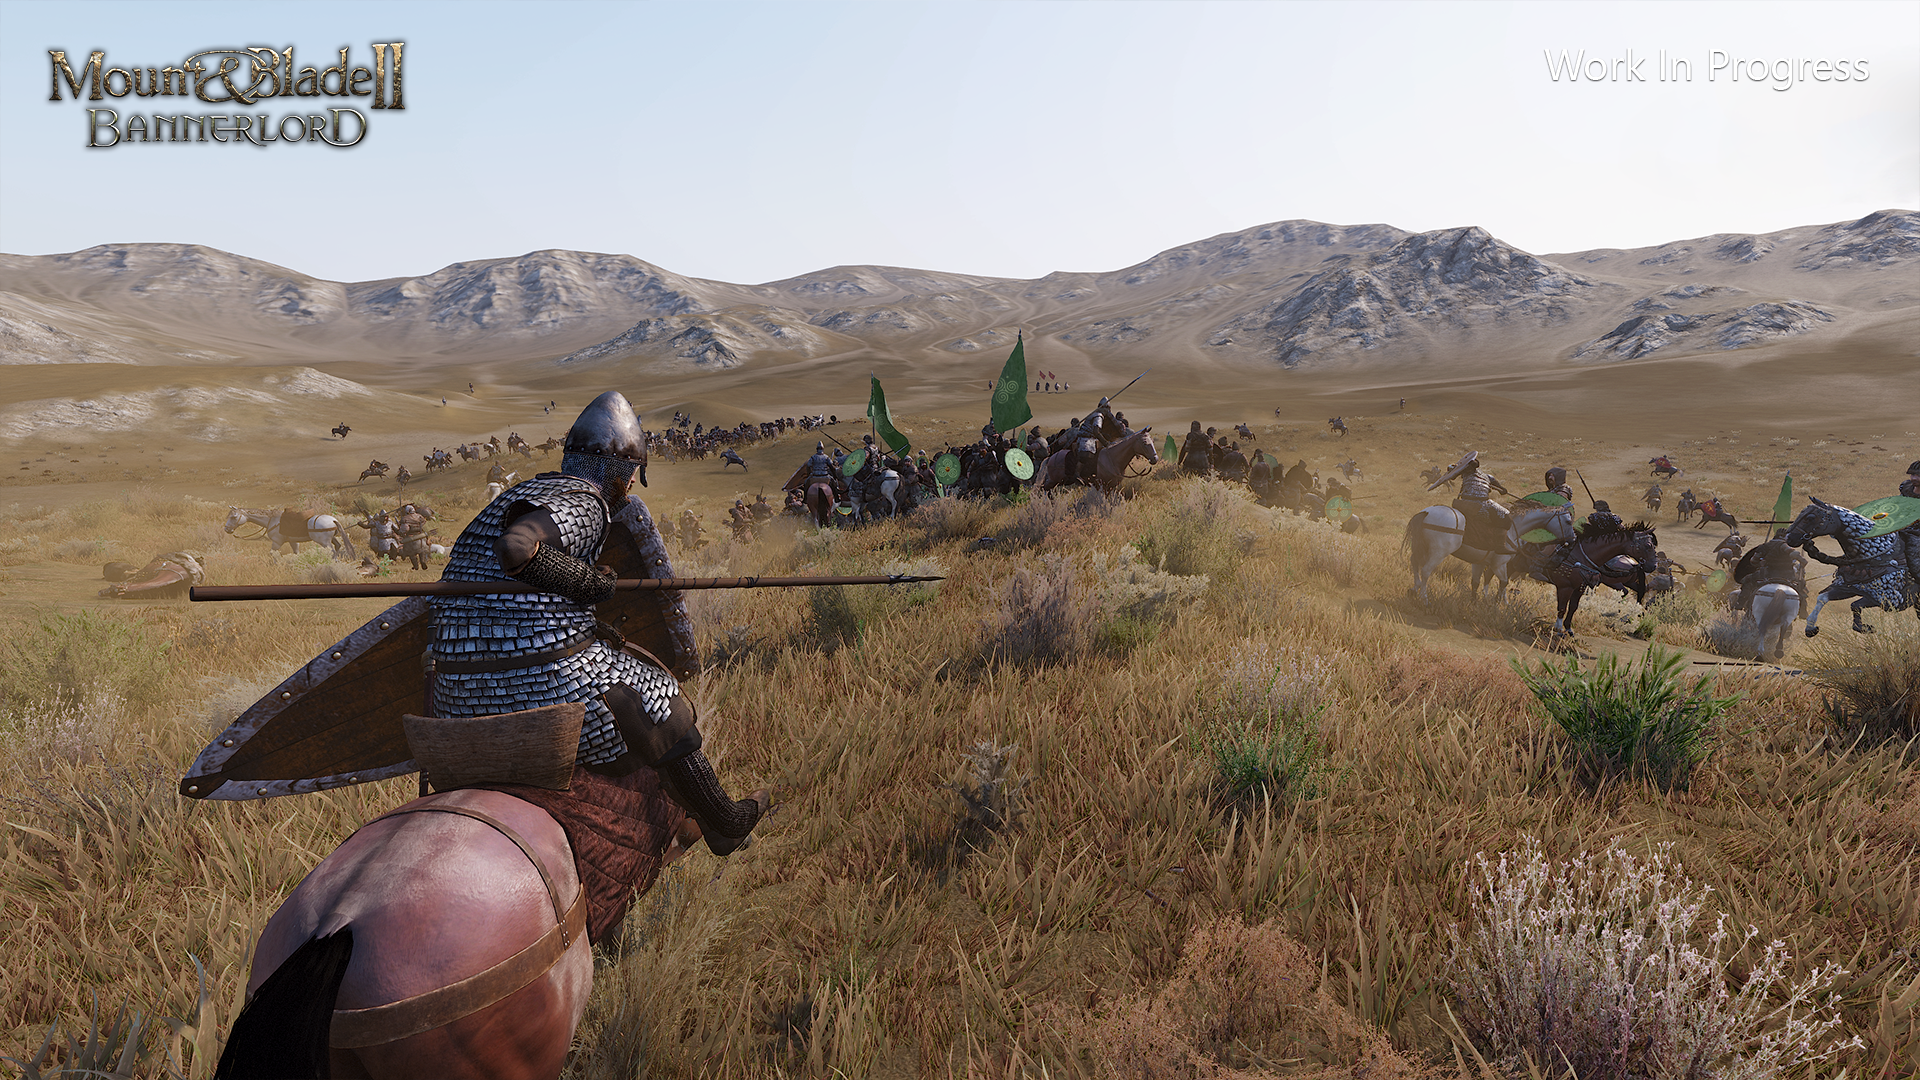 Warband bannerlord. Mount and Blade 2. Mount and Blade 2 Bannerlord. Монтан блейд баннерлорд. Mountain Blade 2 Bannerlord.